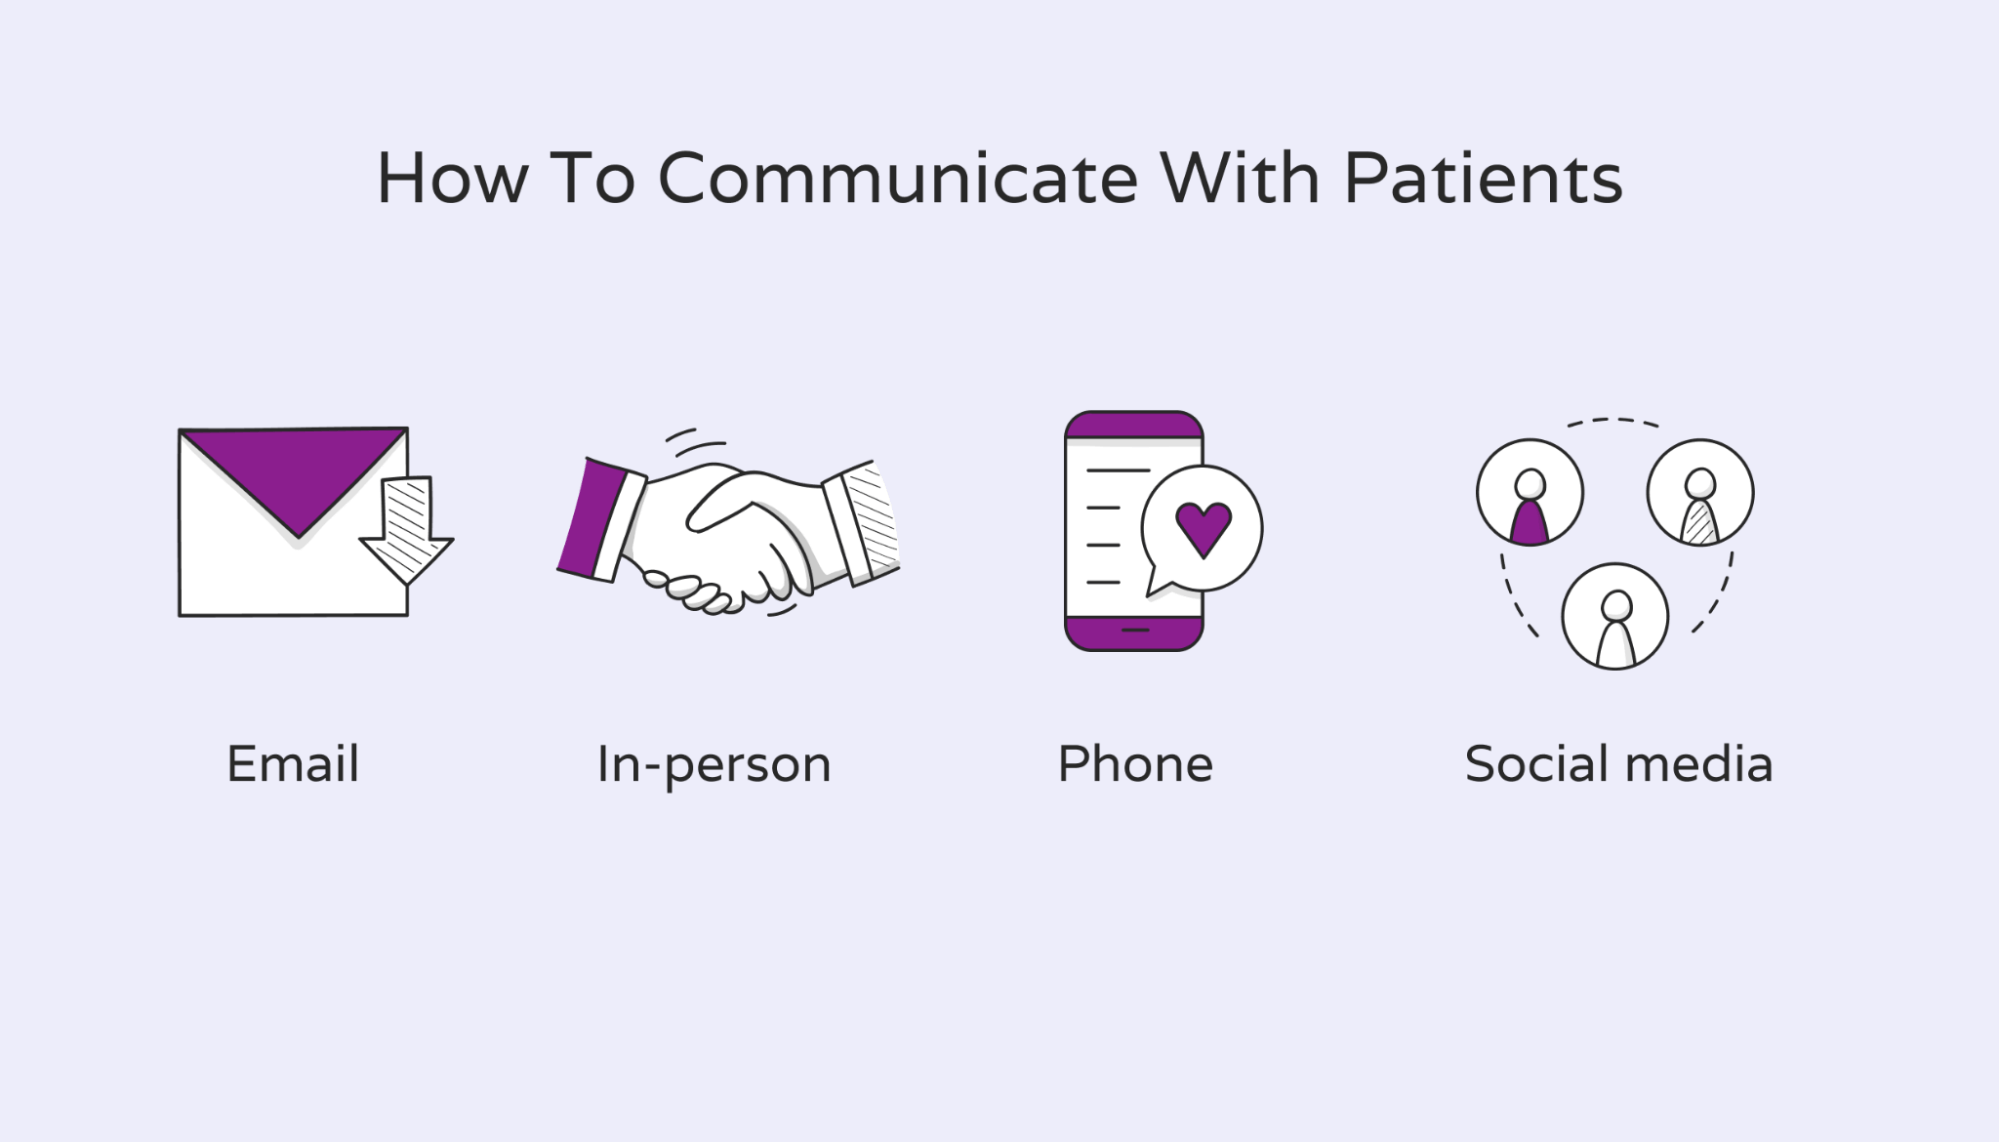 How to communicate with patients